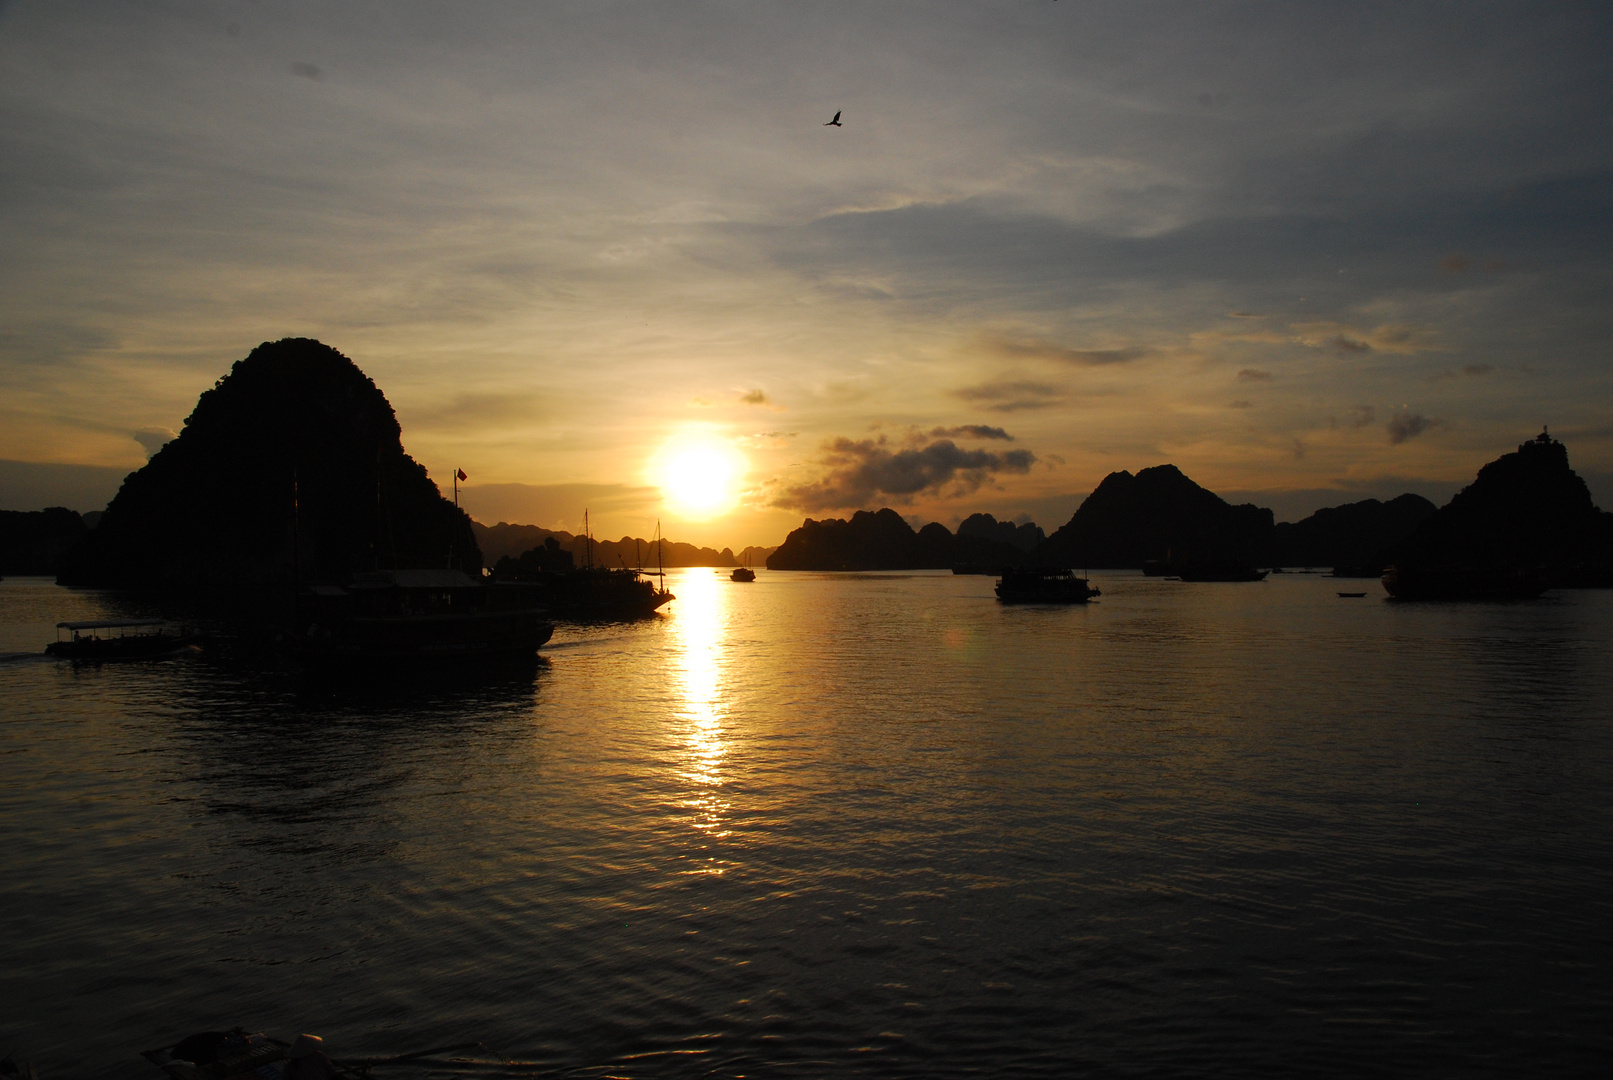 Sunset in HaLong